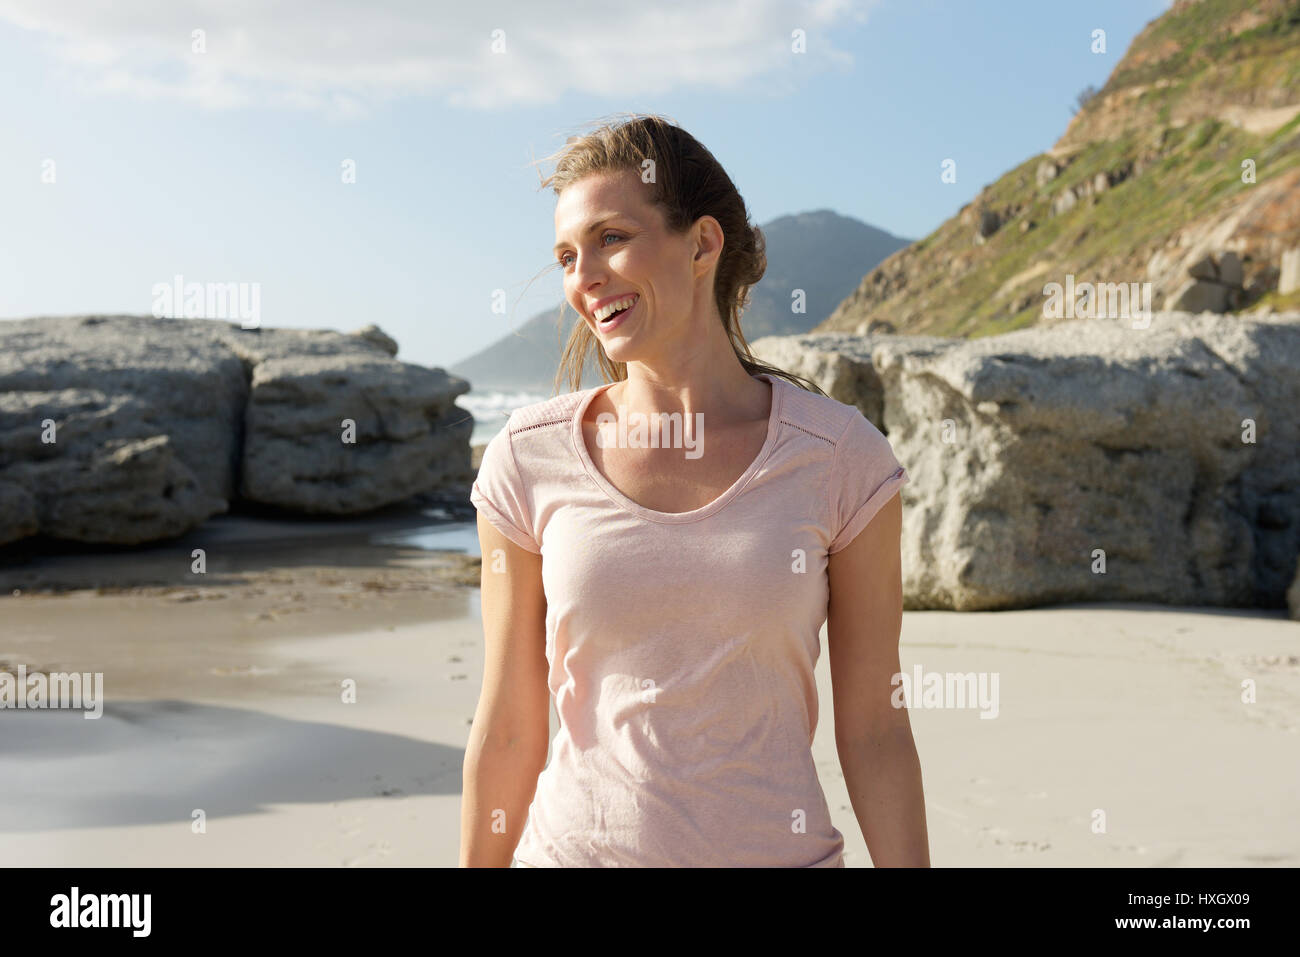 Portrait of a smiling woman at the beach Banque D'Images